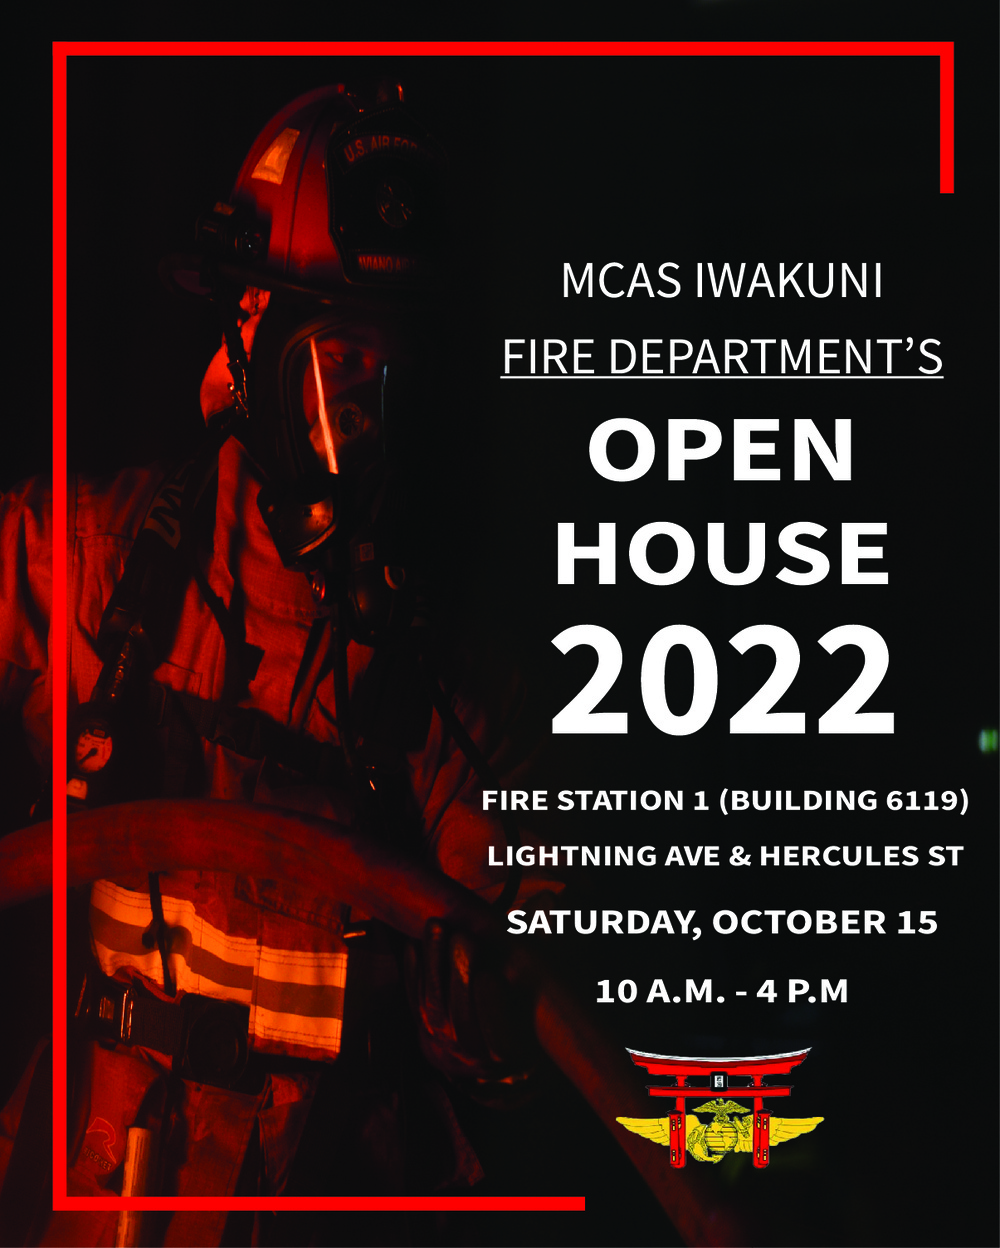 MCAS Iwakuni Fire Department Open House 2022 Graphic